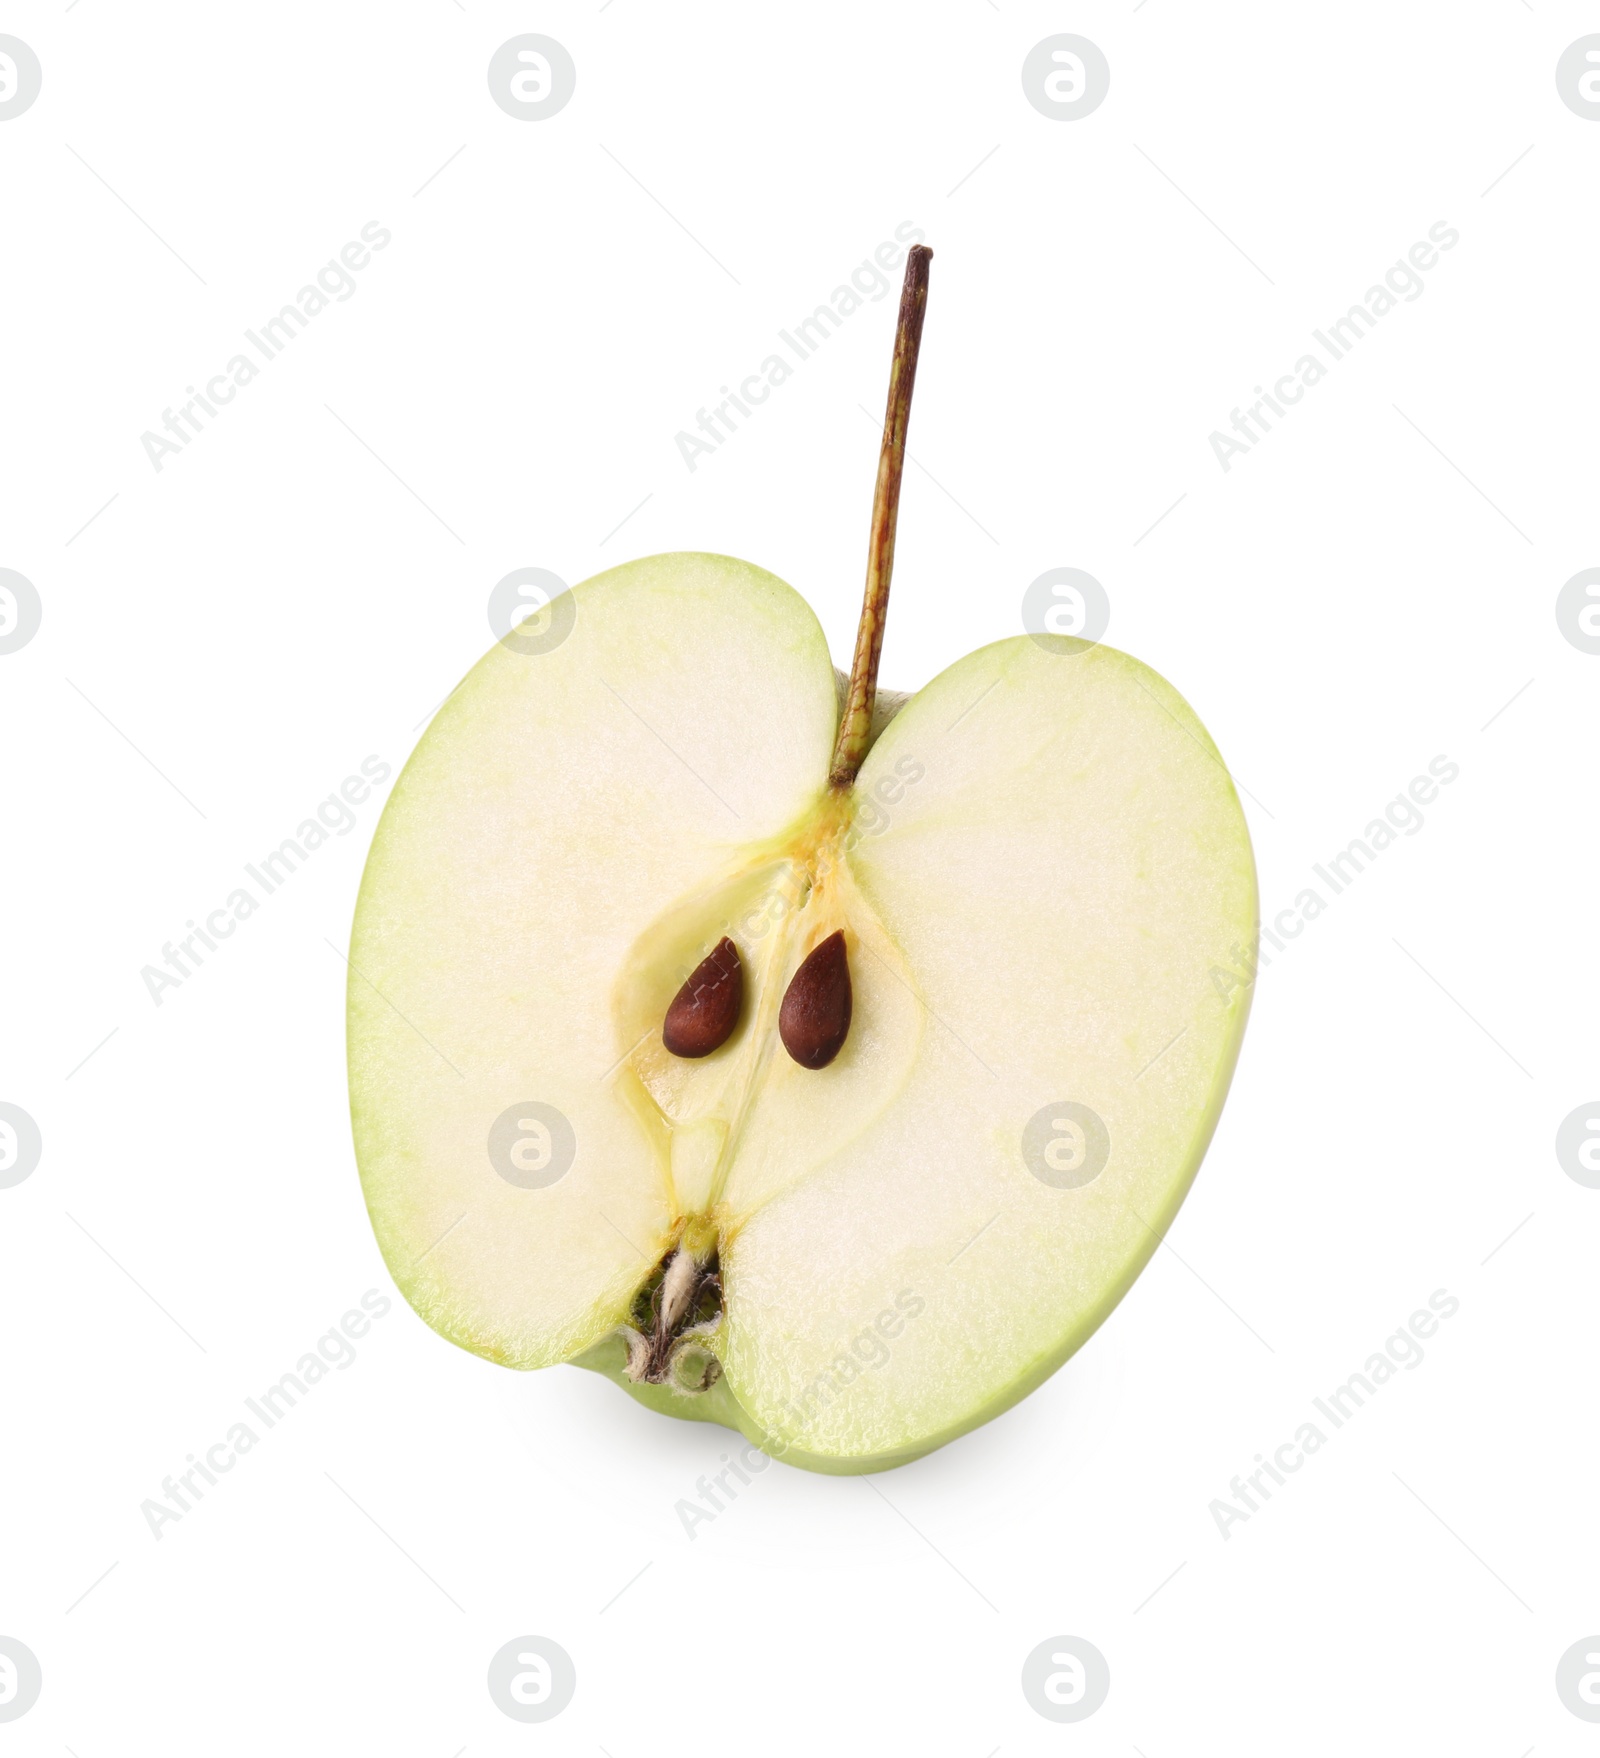 Photo of Half of ripe green apple isolated on white